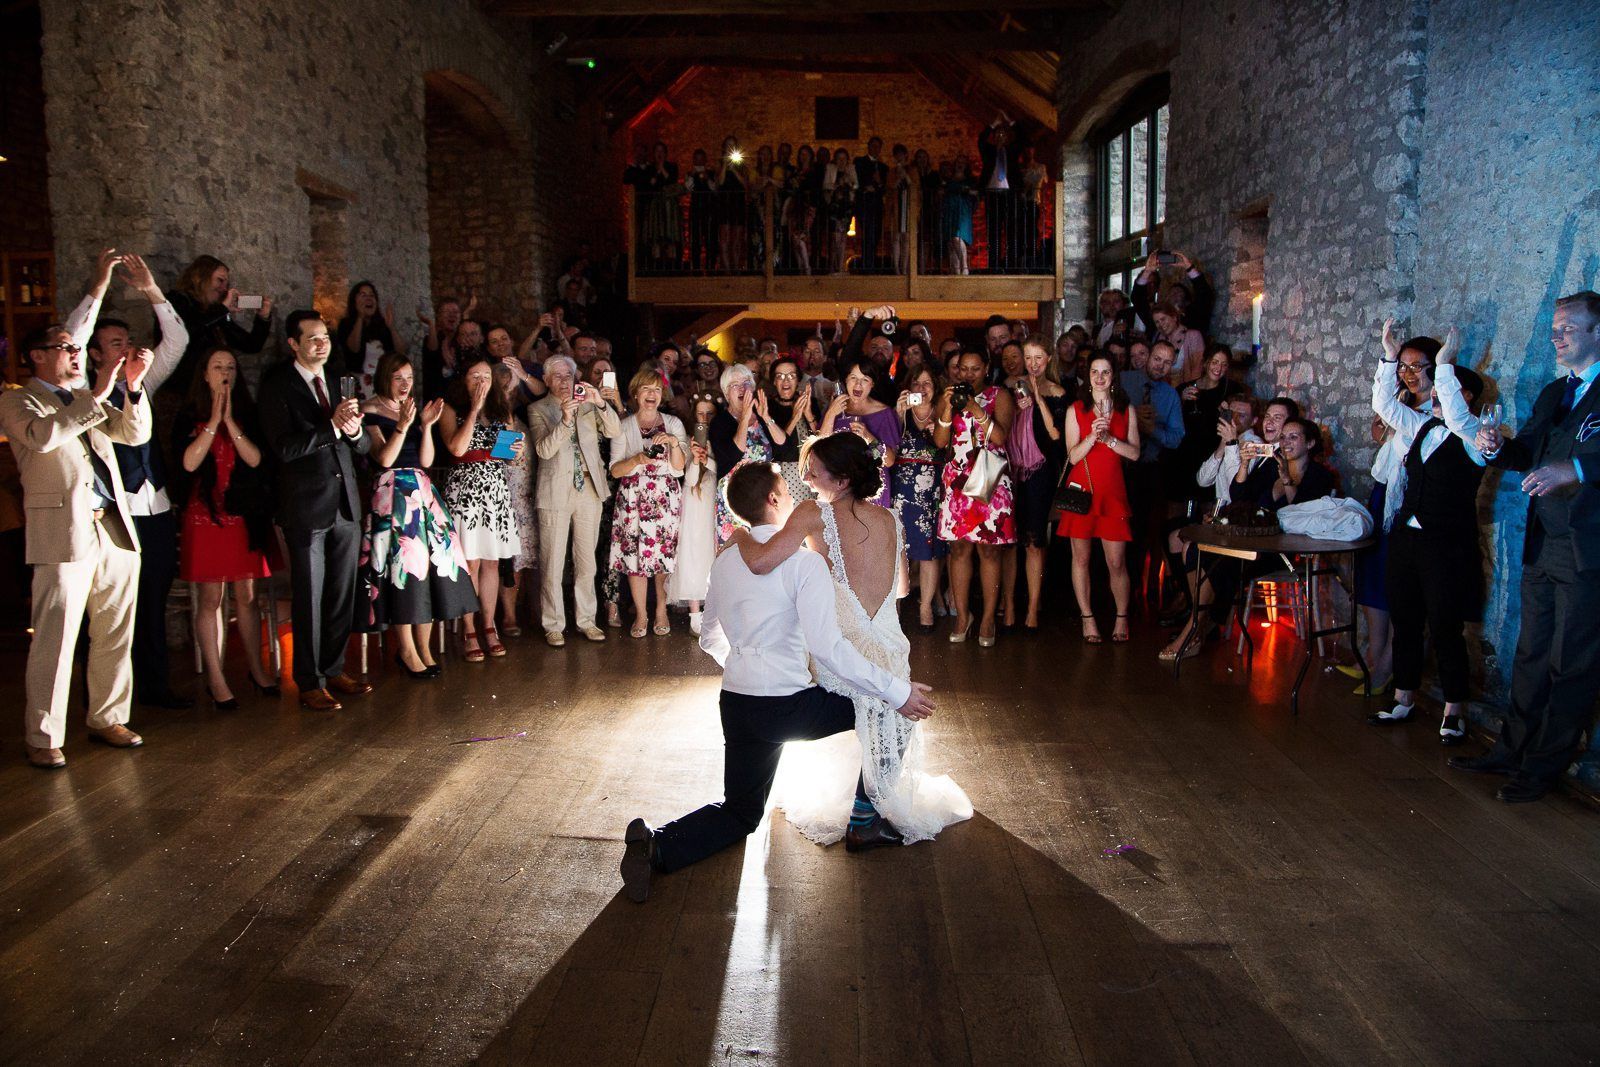 A bride and groom are dancing in front of a crowd of people at a wedding reception.